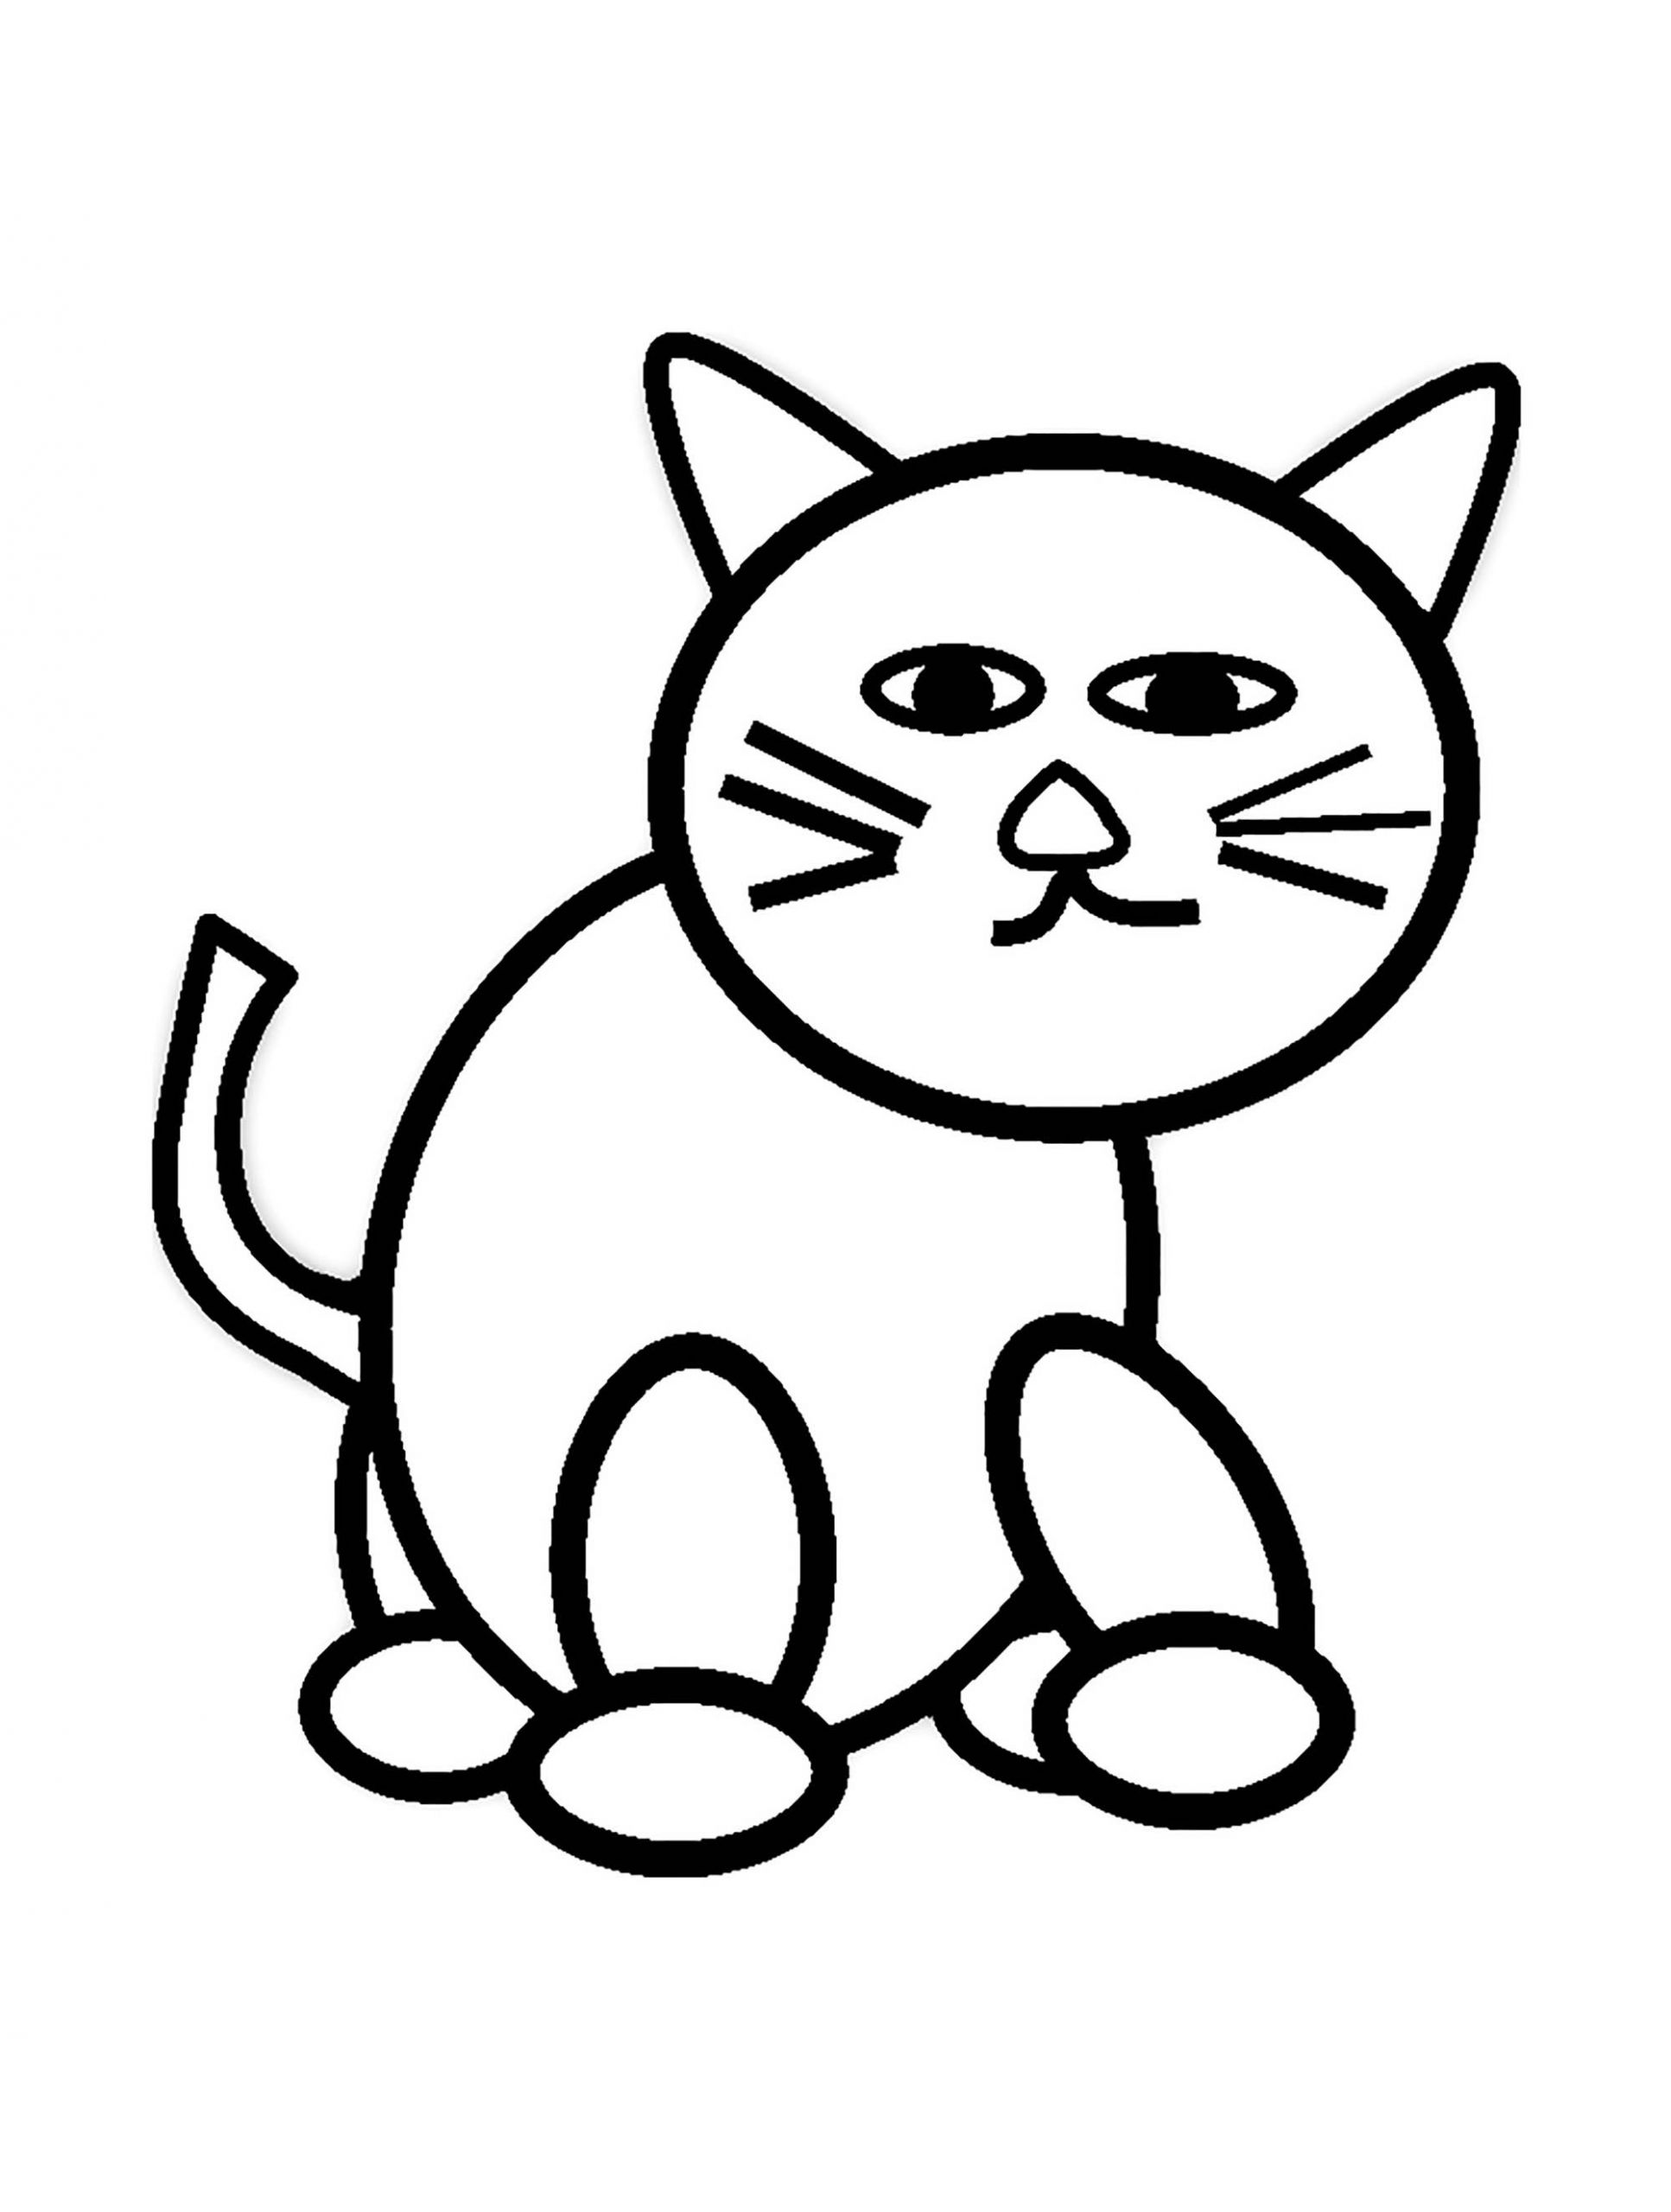 Kids Coloring Pages Cats
 Cat for kids simple drawing Cats Kids Coloring Pages